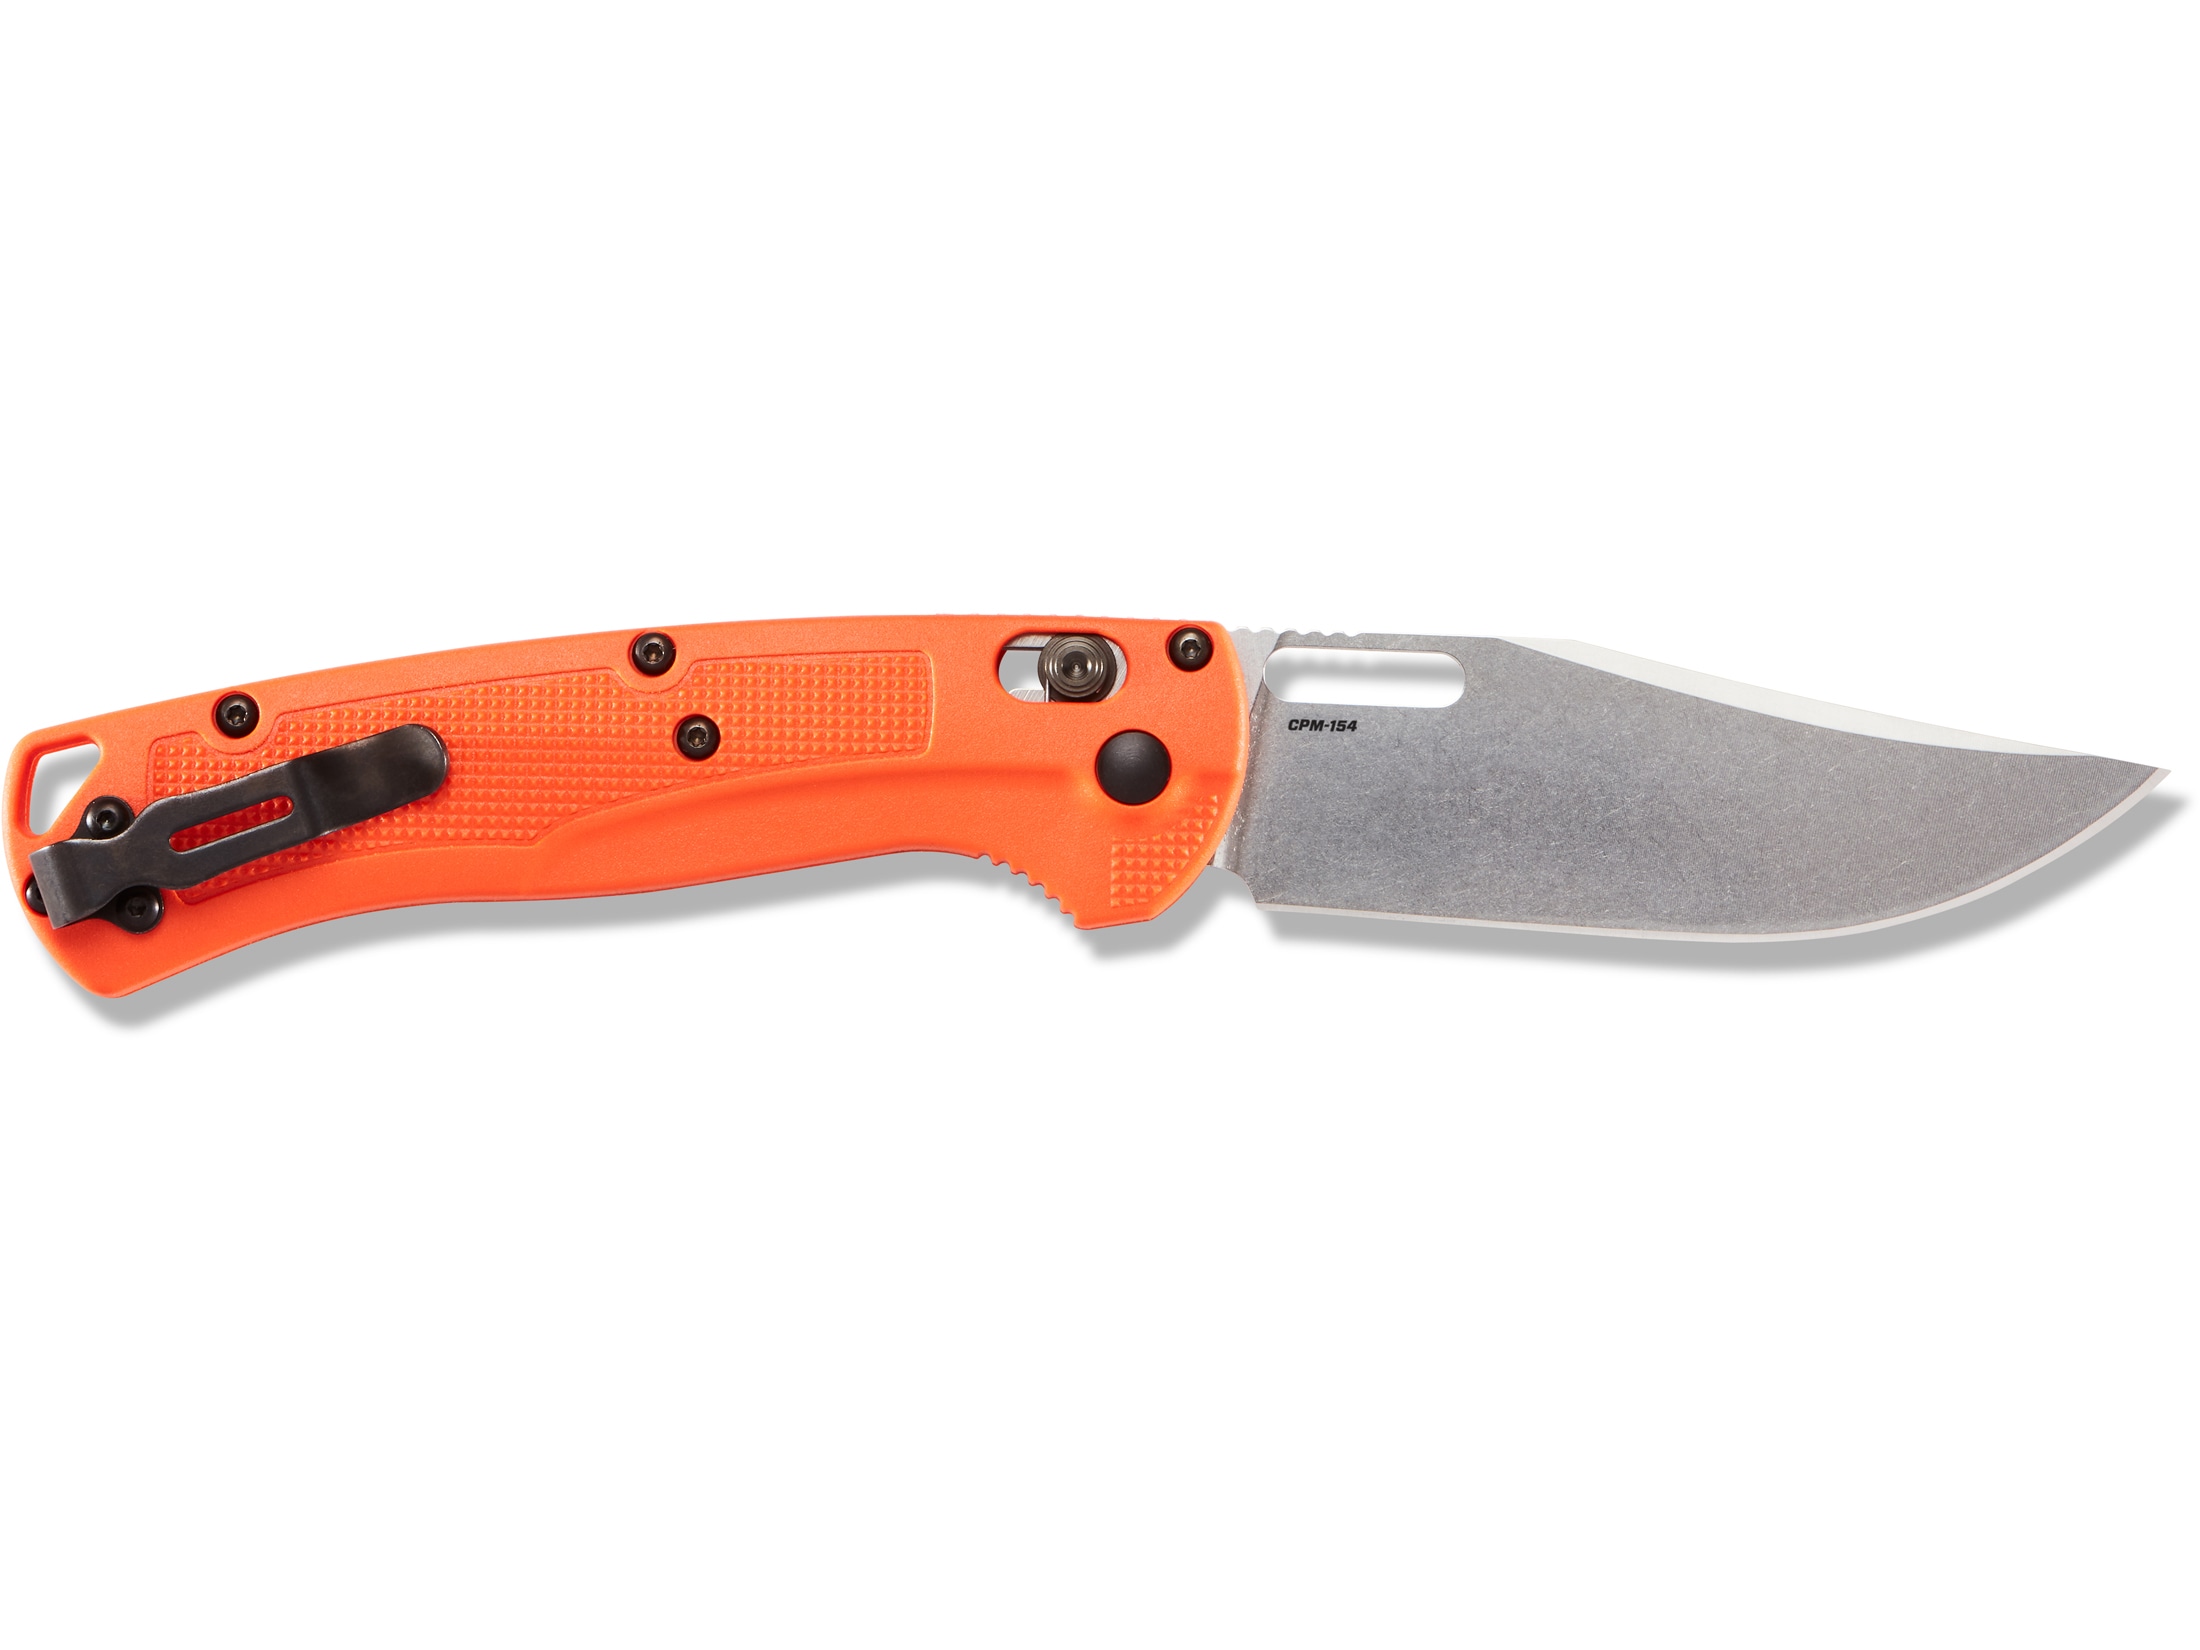 Benchmade Taggedout Folding Knife 3.5″ Clip Point CPM-154 Polished Blade Grivory Handle Orange For Sale